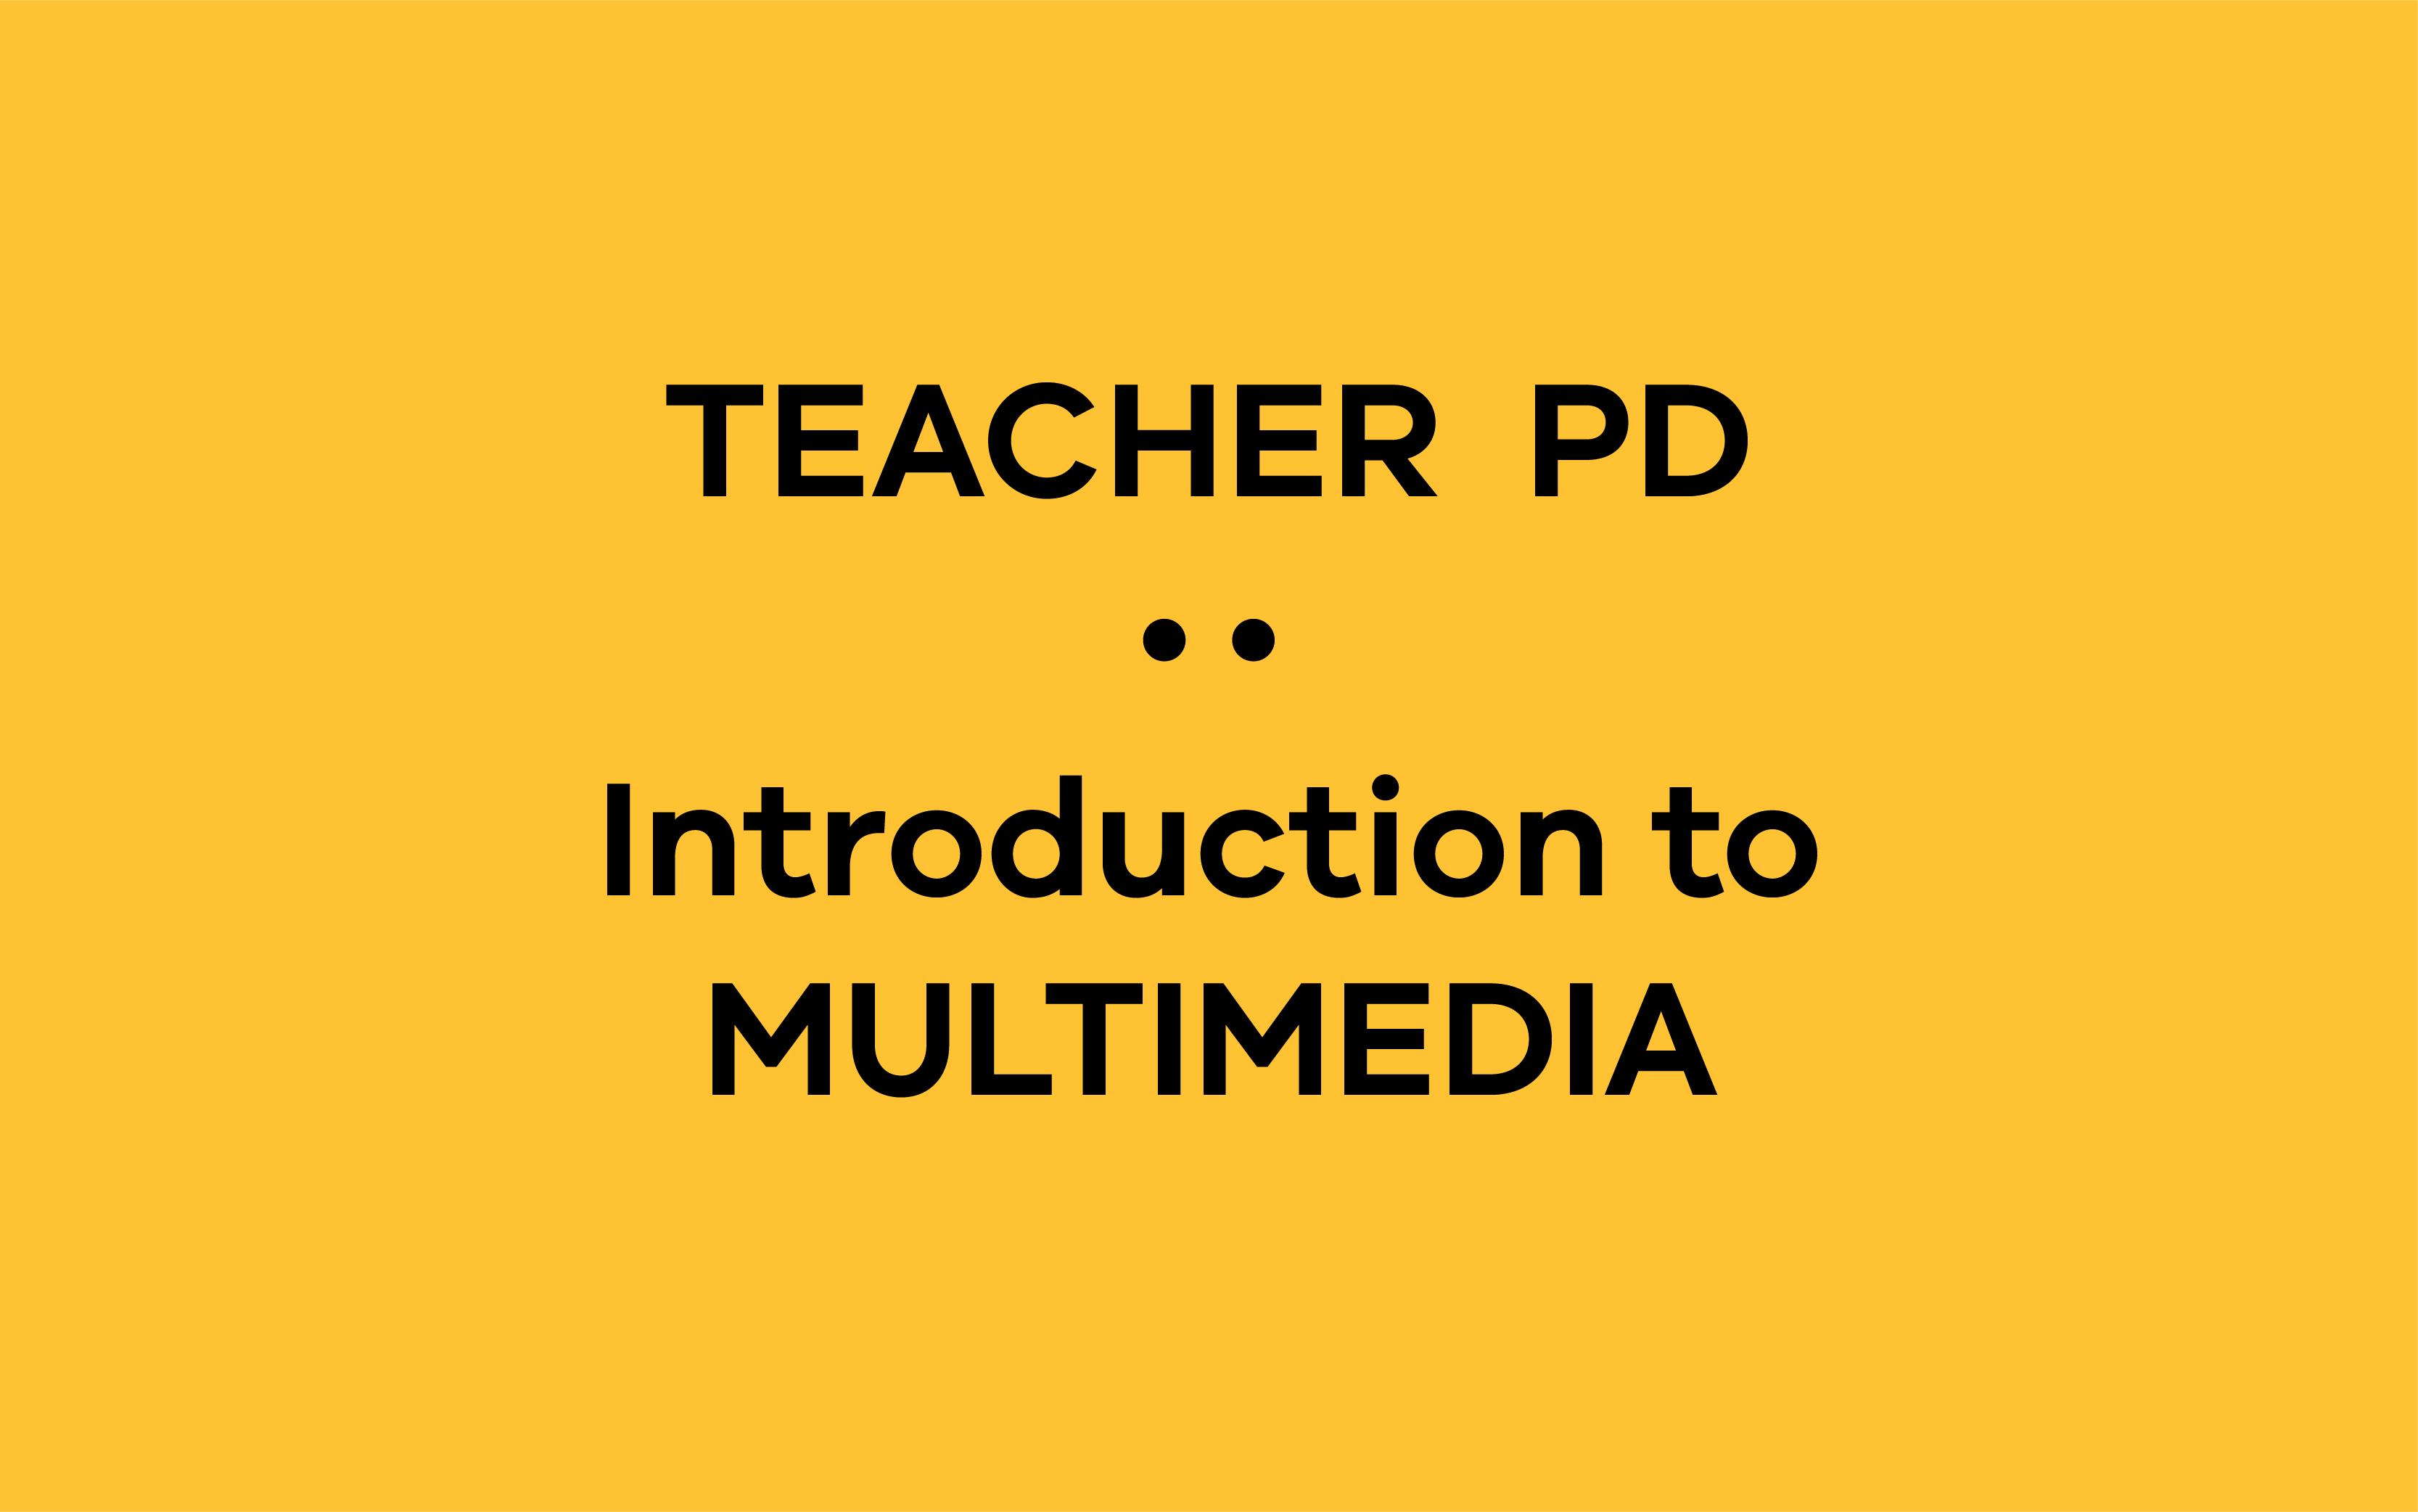 2021 - Introduction to: Multimedia